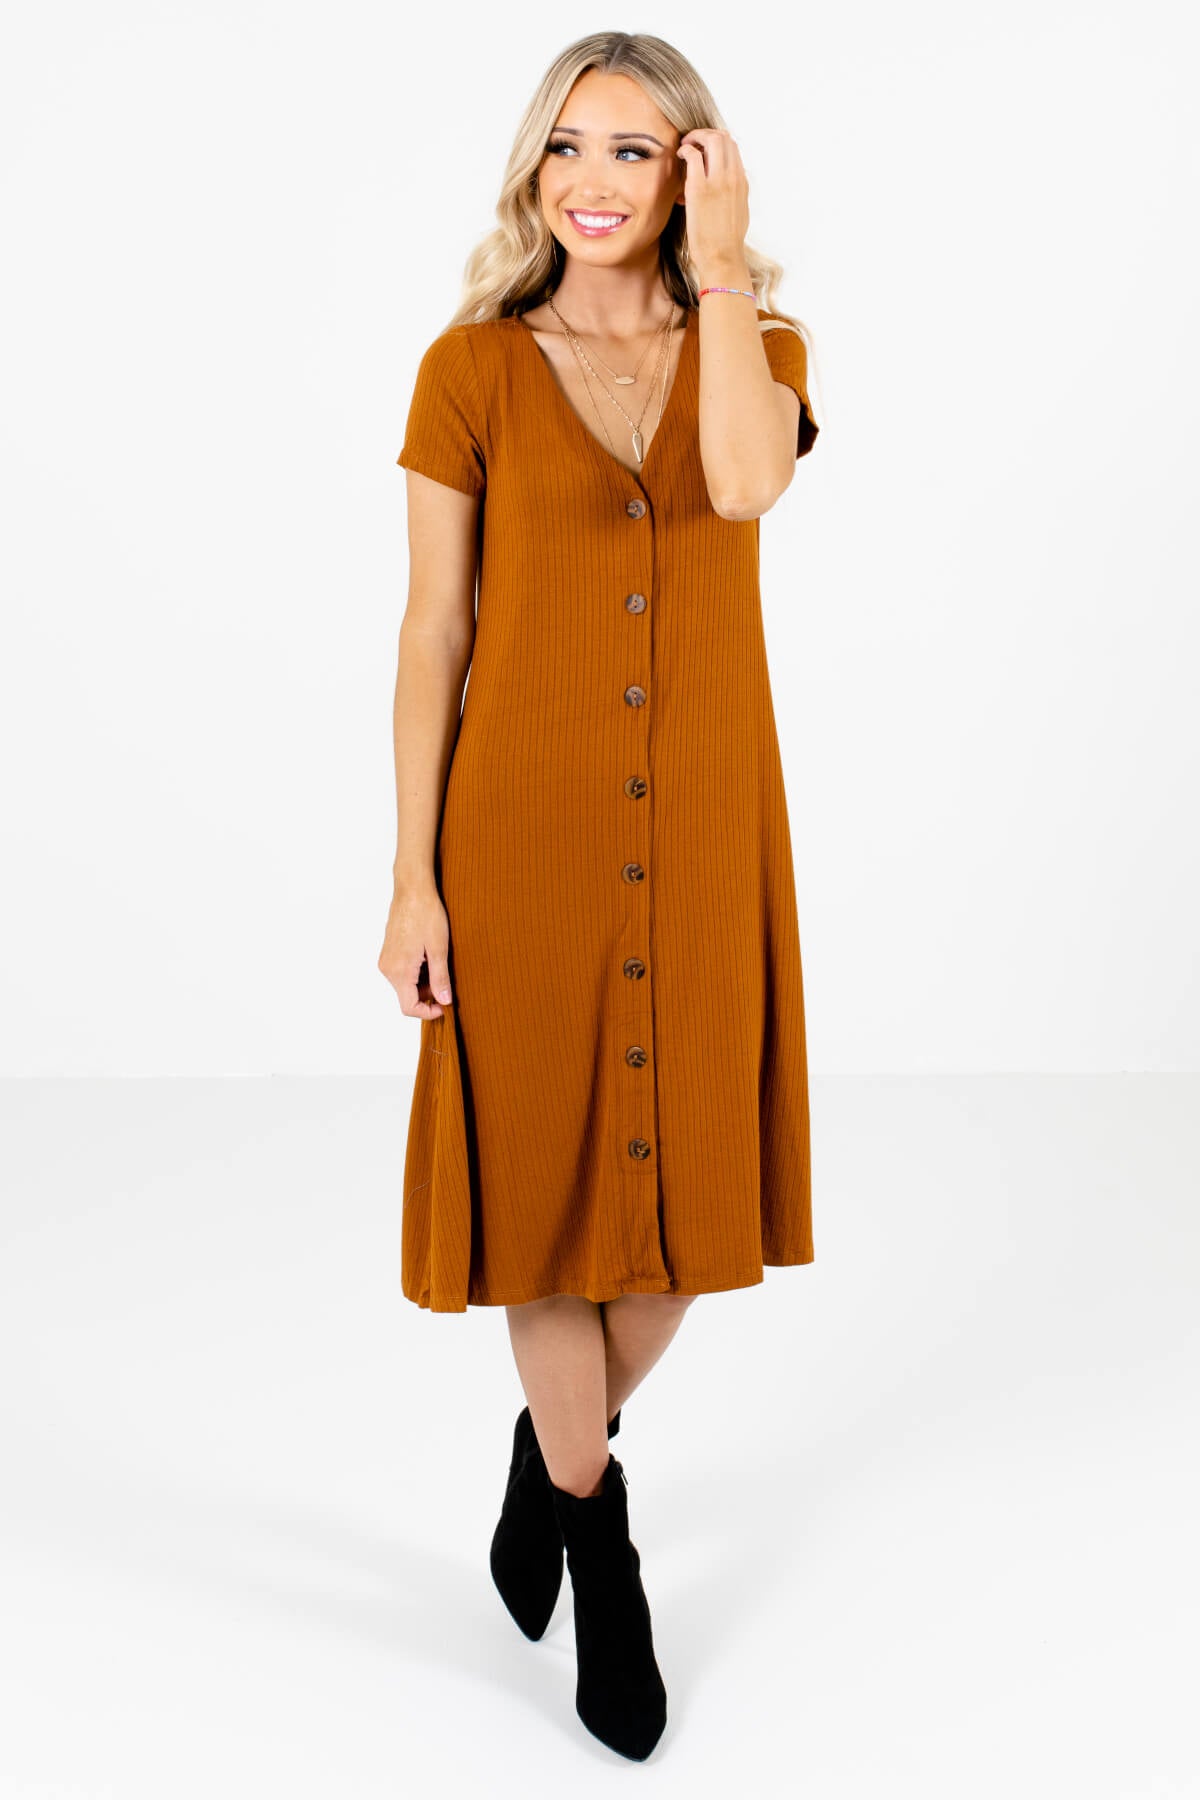 Women’s Rust Orange Fall and Winter Boutique Clothing